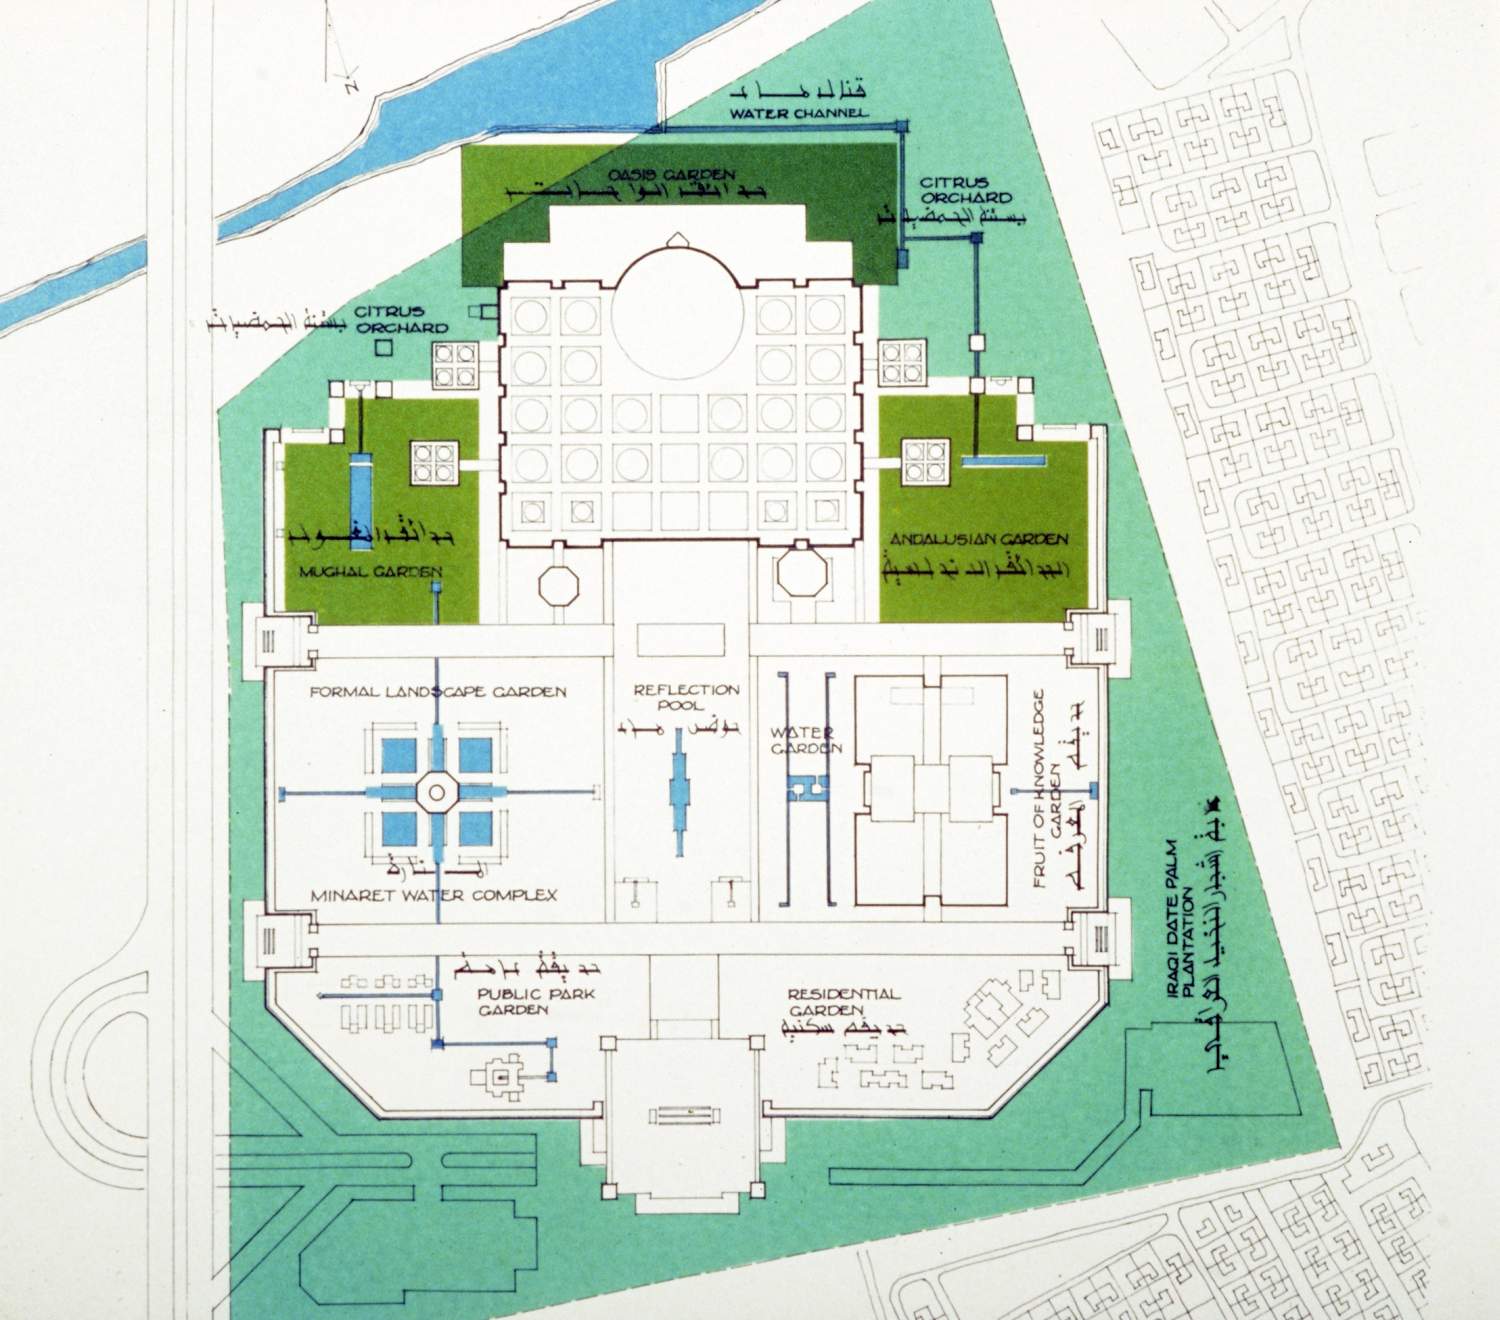 Site plan, Water and Landscape of the Islamic Heritage.